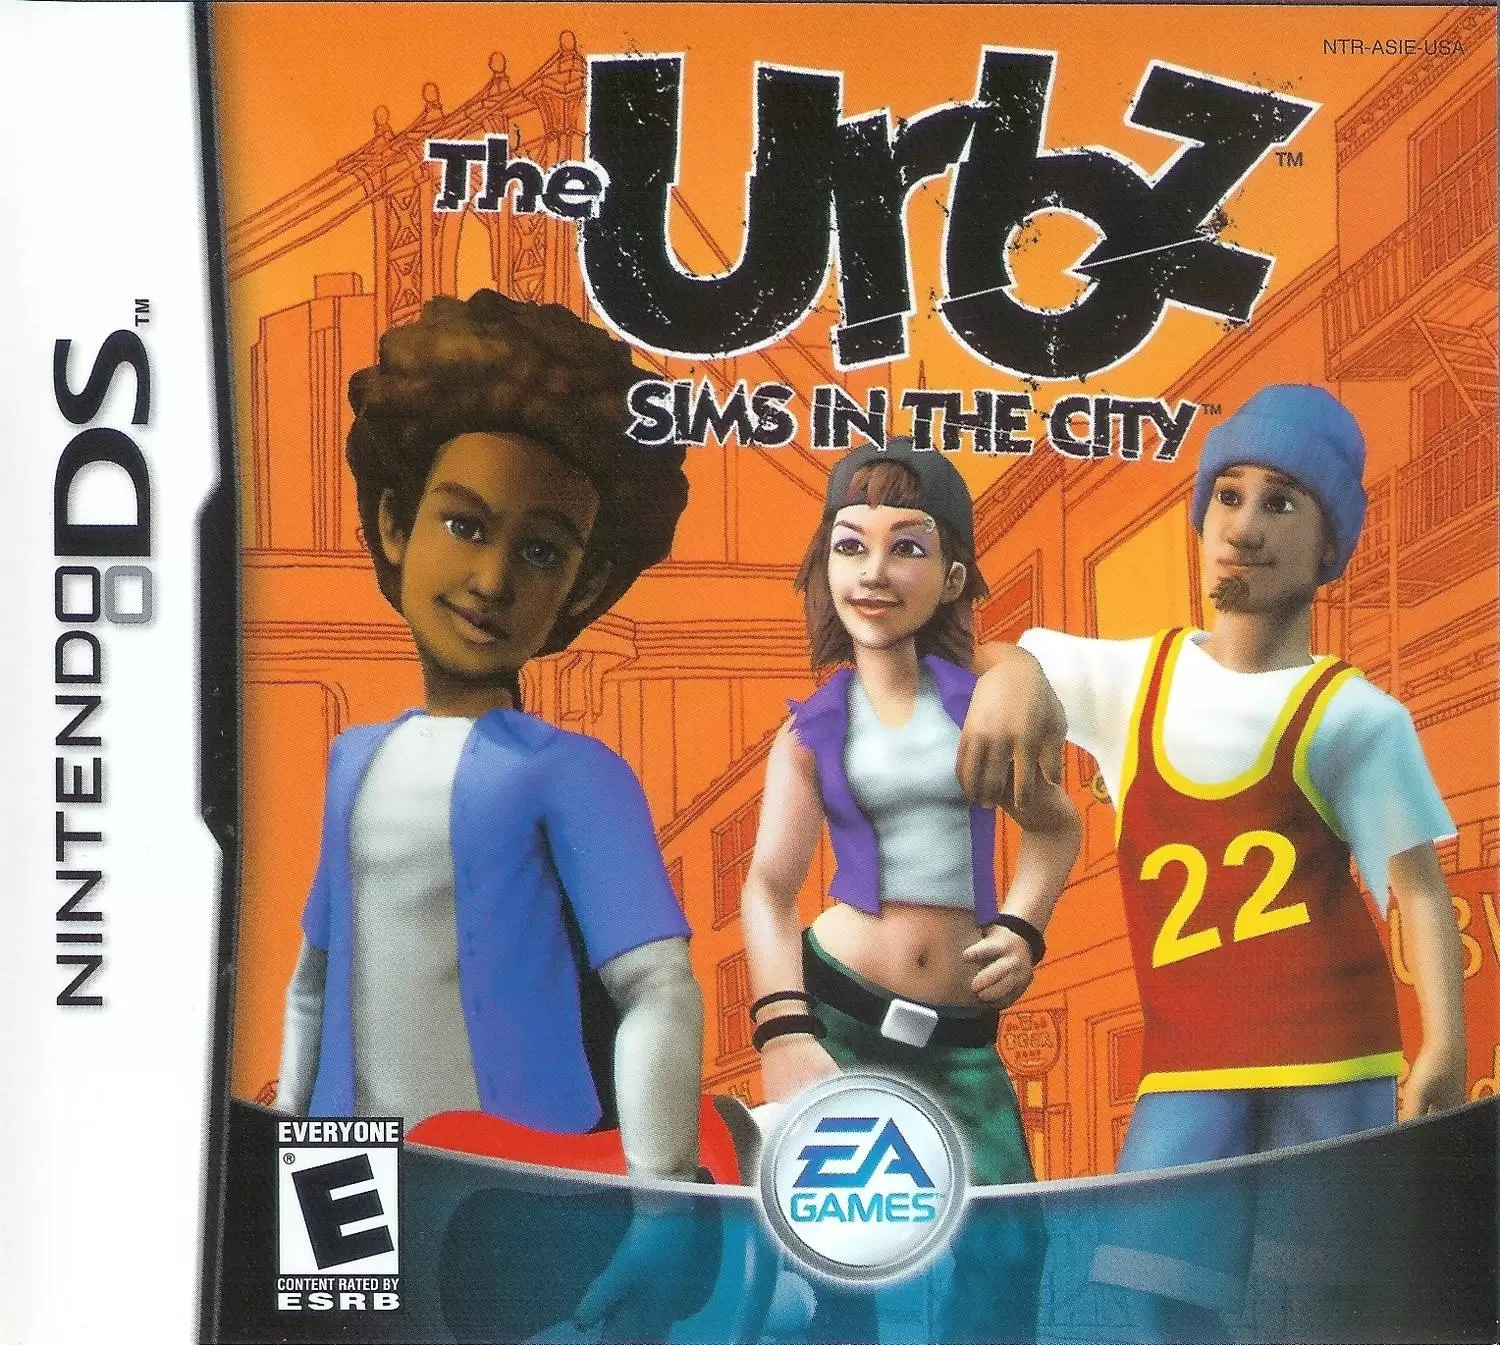 Nintendo DS Games - The Urbz: Sims in the City